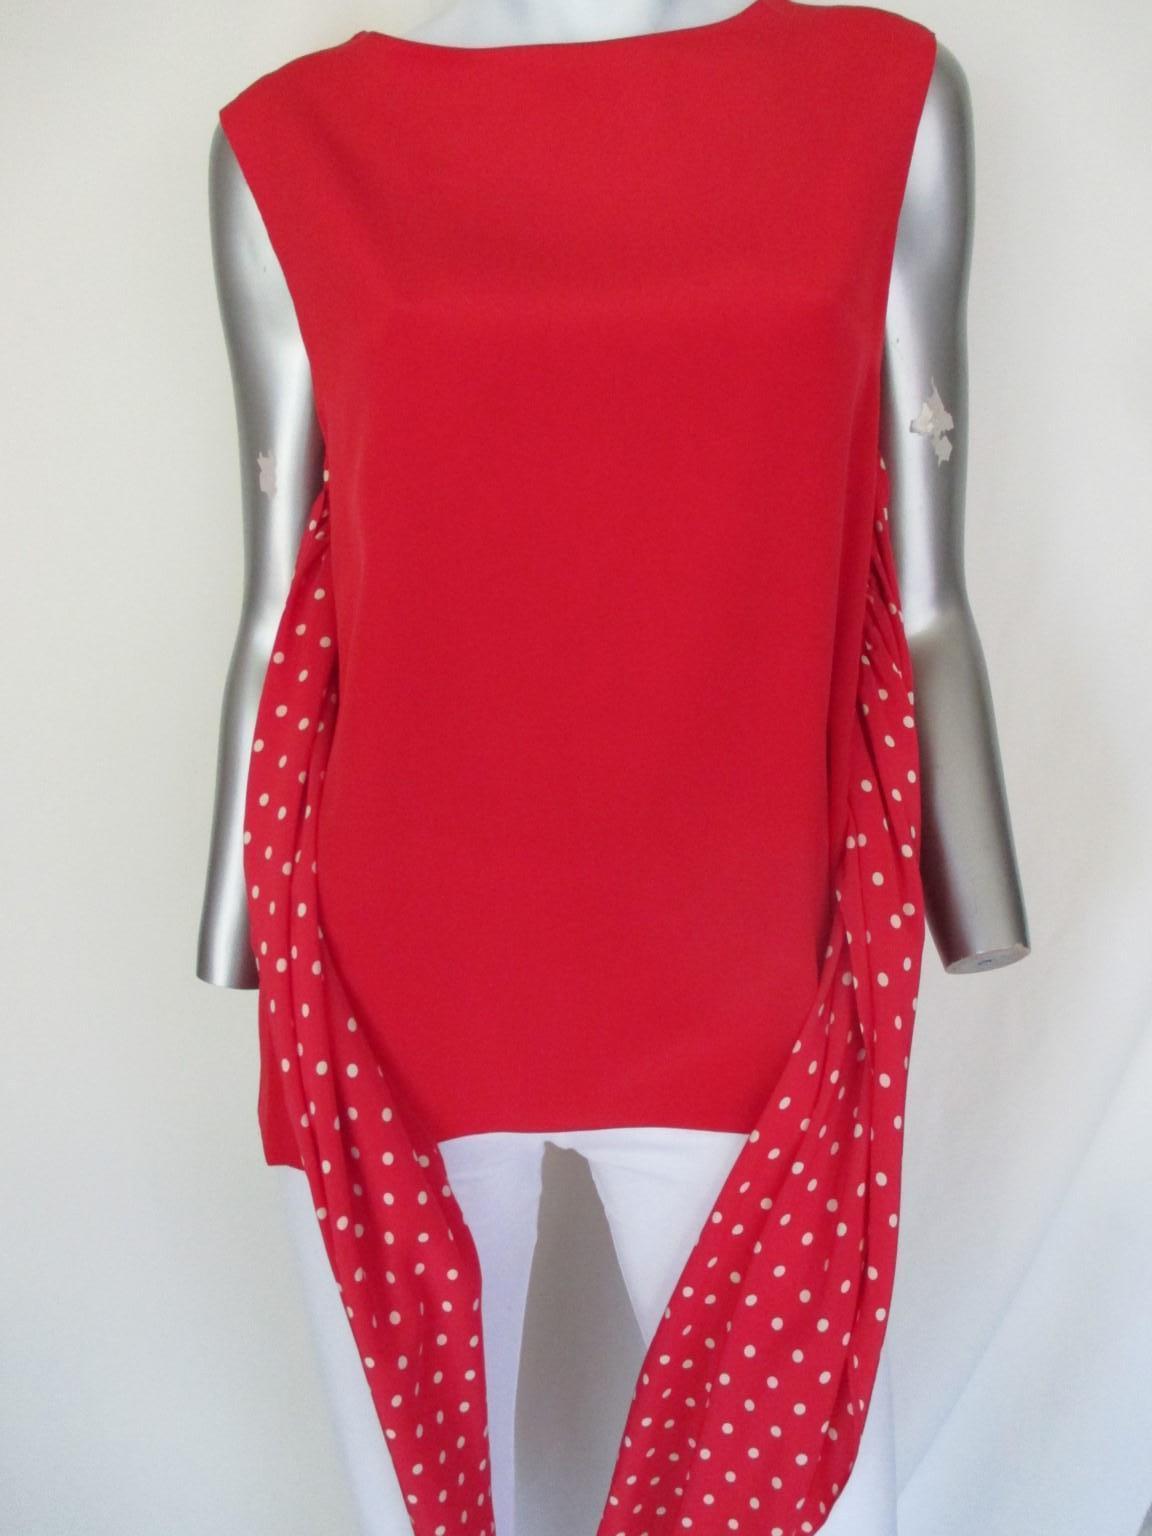 Vintage red silk Valentino from the miss V collection with white polkadots.
We offer more exclusive vintage items, view our frontstore.

The blouse has two attached parts on each side for closing in front and back with a long side zipper.
Appears to